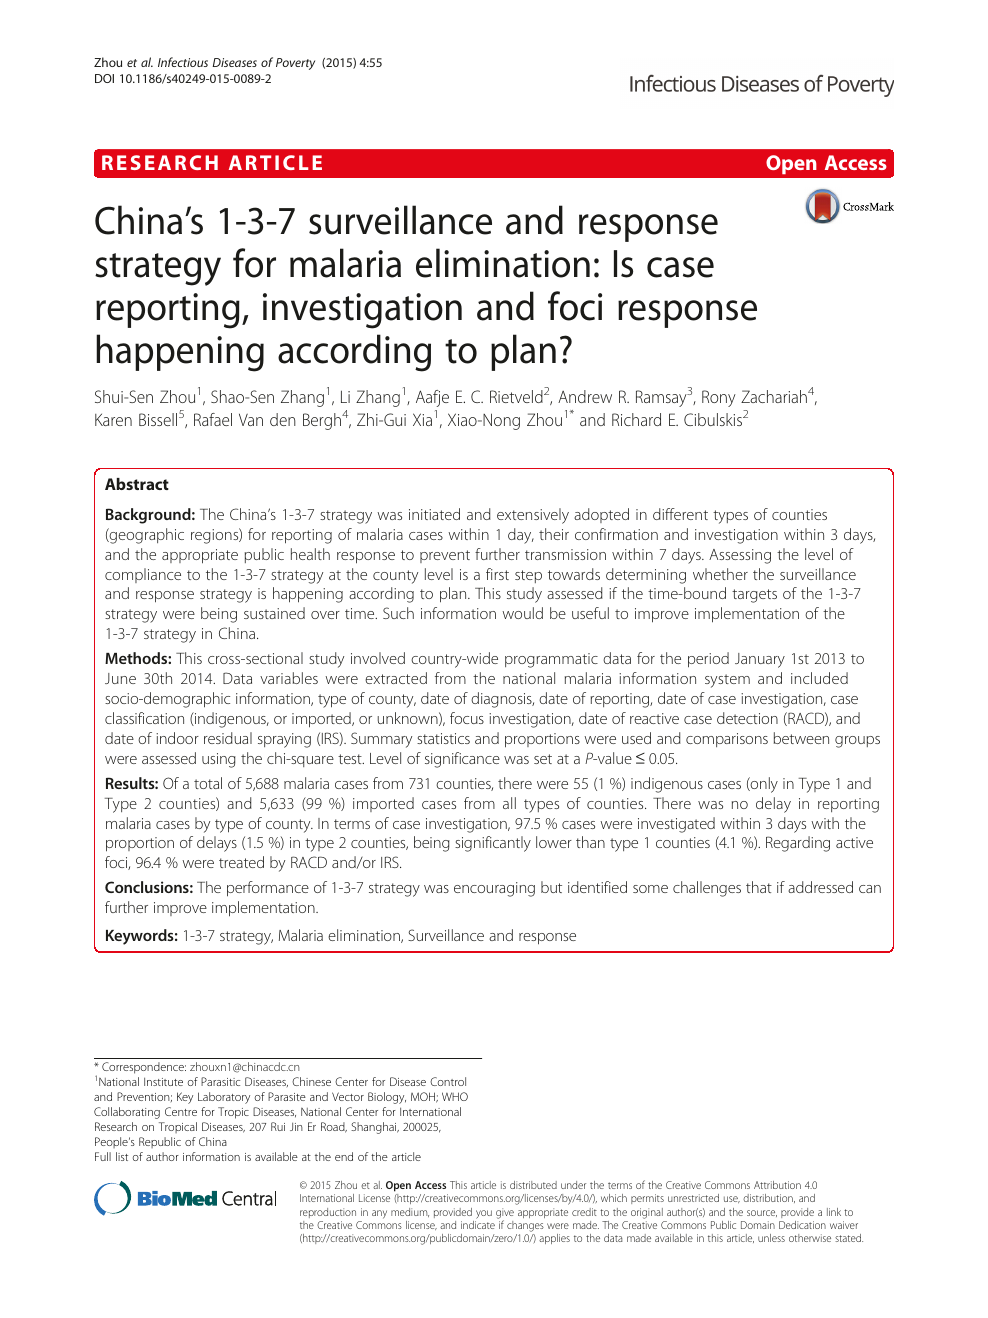 China's 1-3-7 surveillance and response strategy for malaria